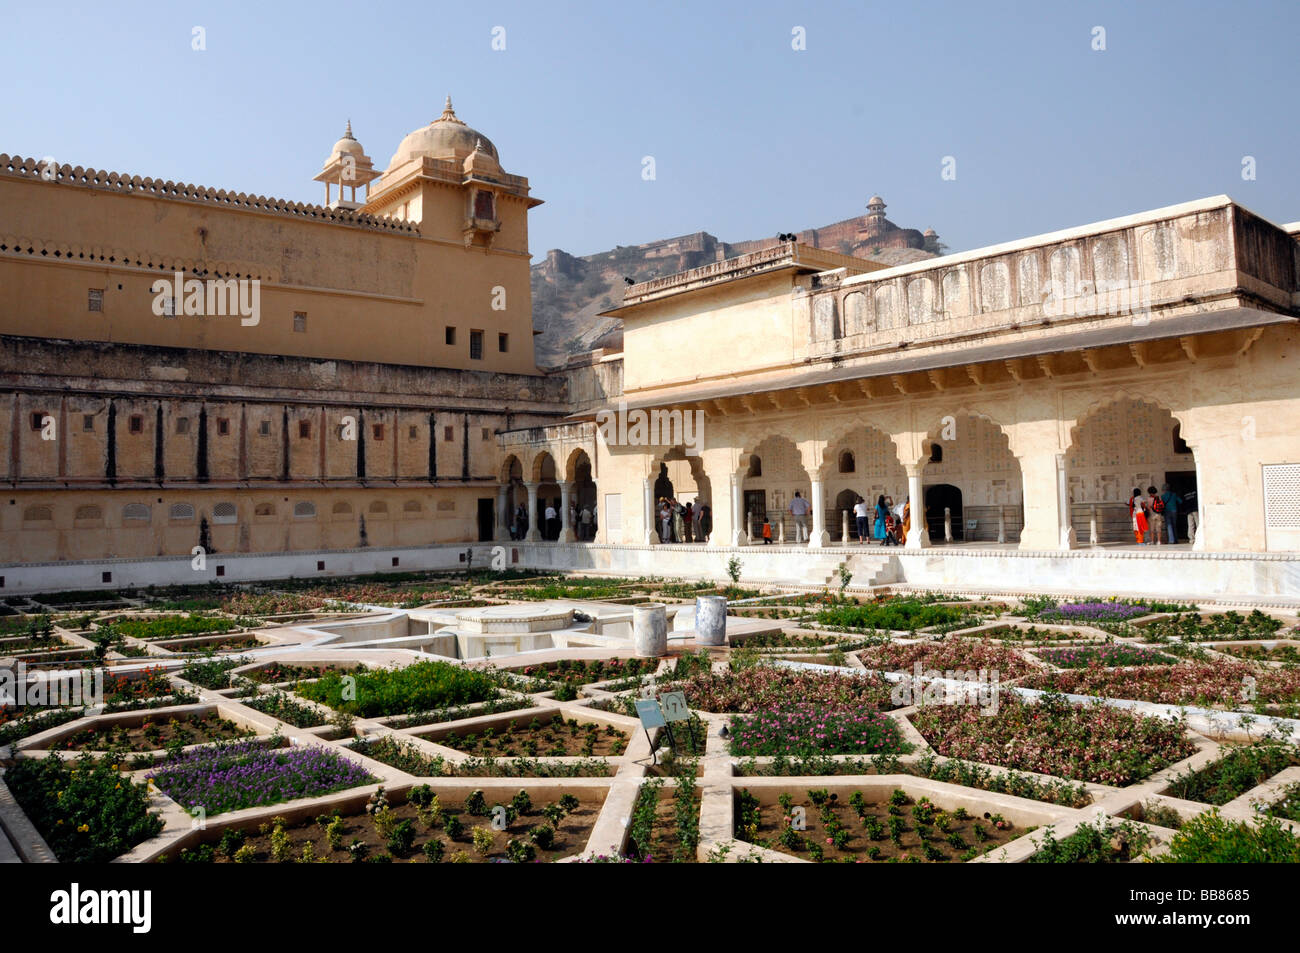 Garden in the Fort Amber Palace, Amber, Rajasthan, North India, Asia Stock Photo